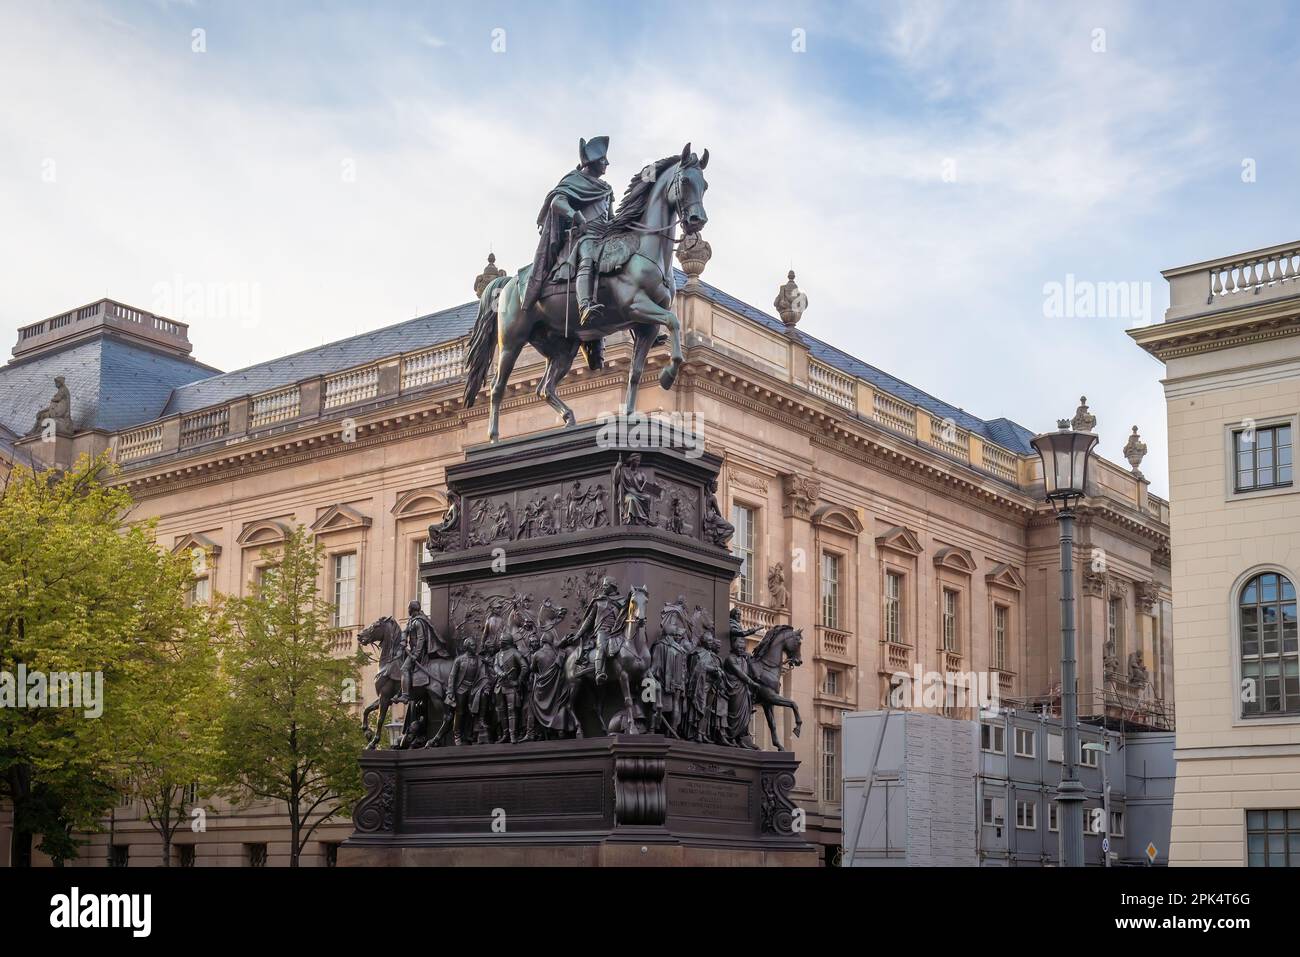 Frederick the Great Statue at Unter den Linden Boulevard - Berlin, Germany Stock Photo